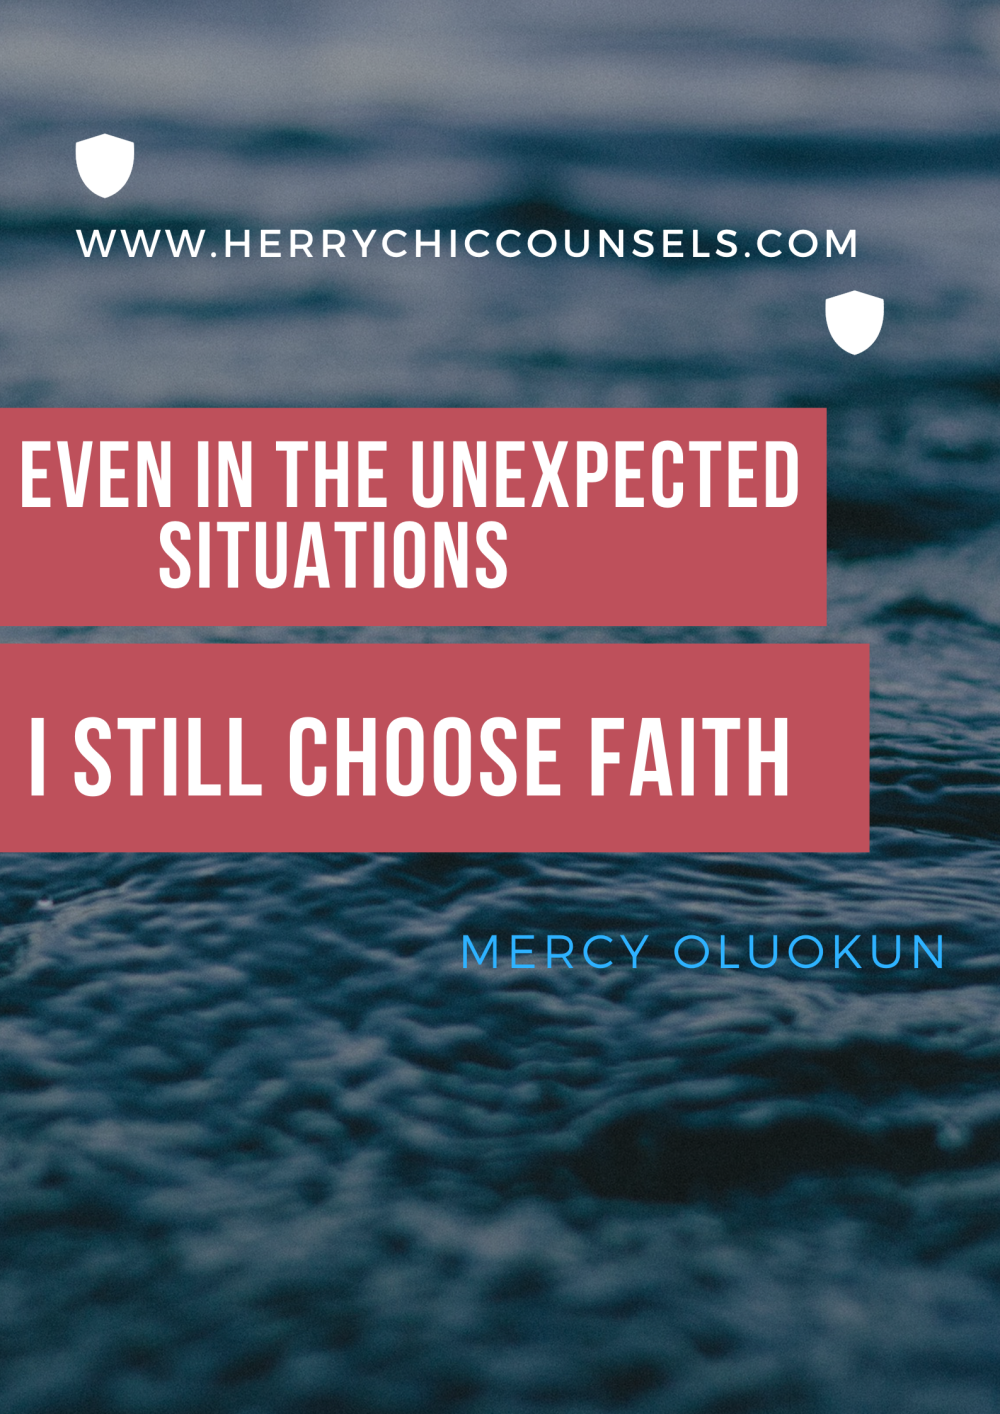 Unexpected situation - Choose faith